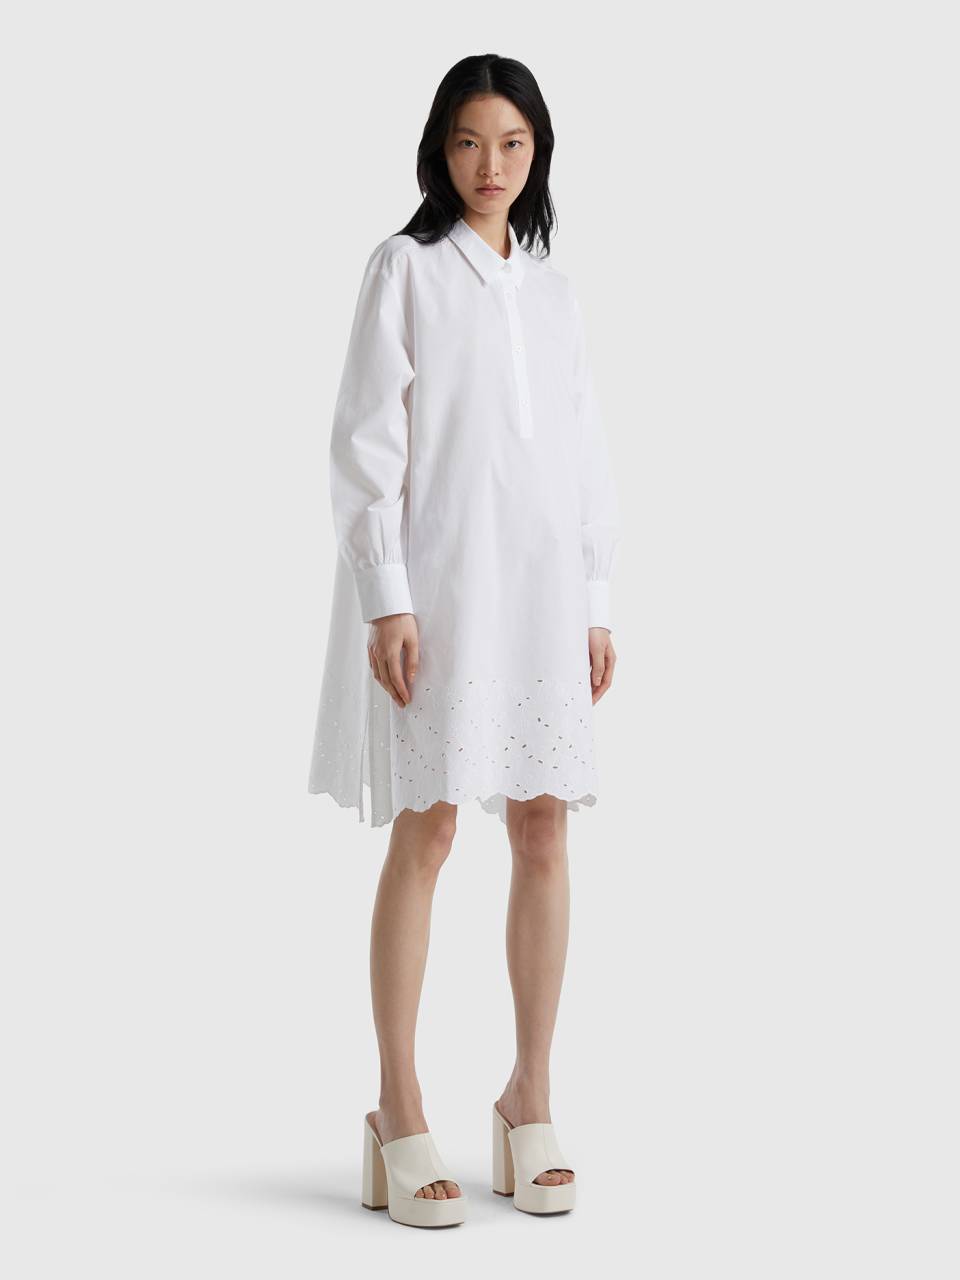 Benetton shirt dress with broderie anglaise embroidery. 1